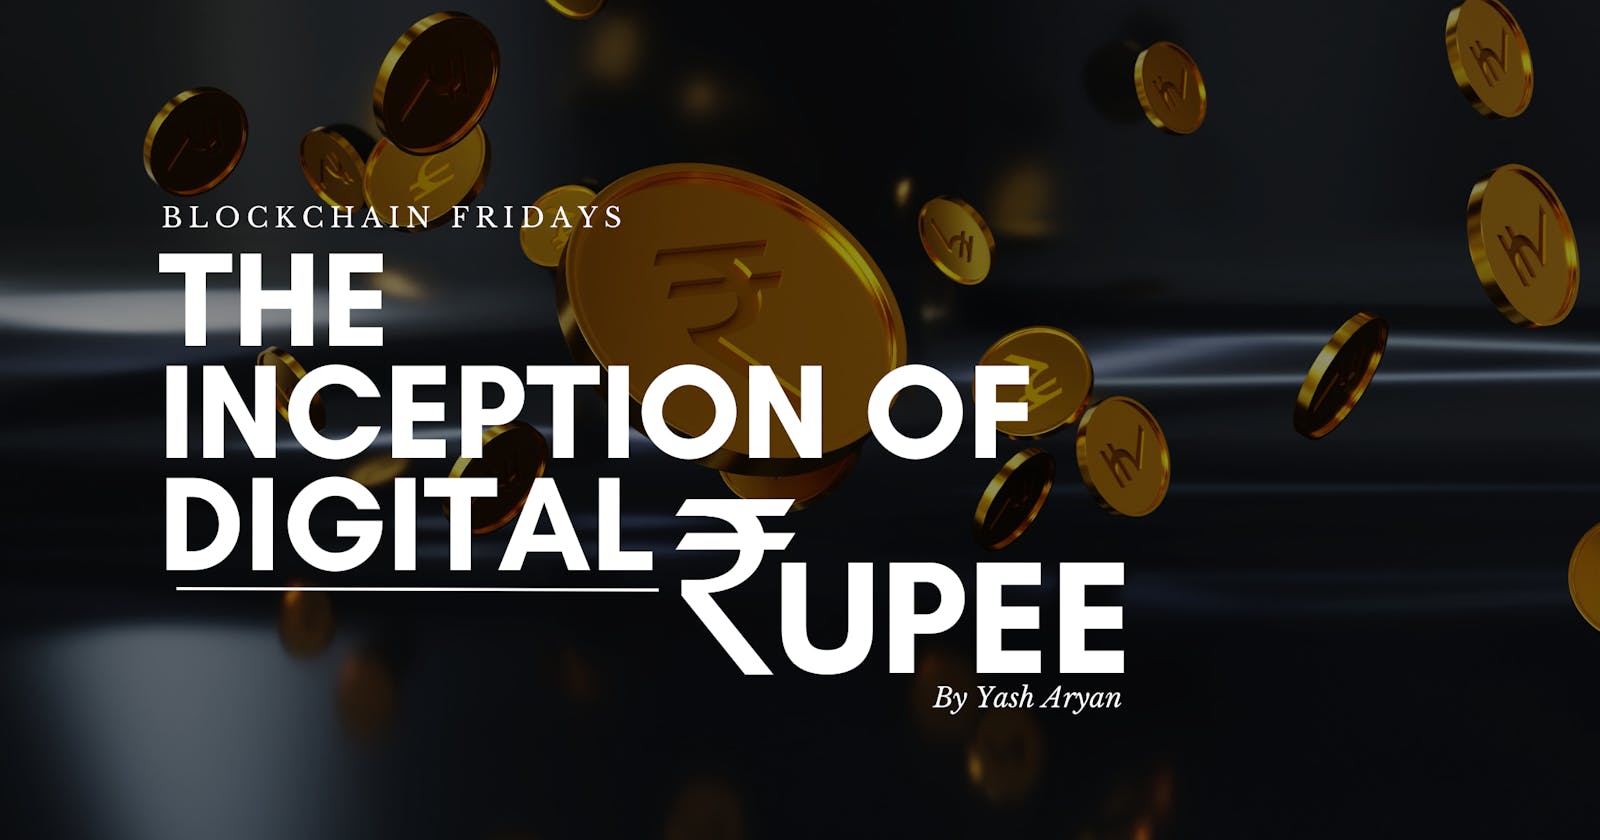 The Inception of Digital Rupee